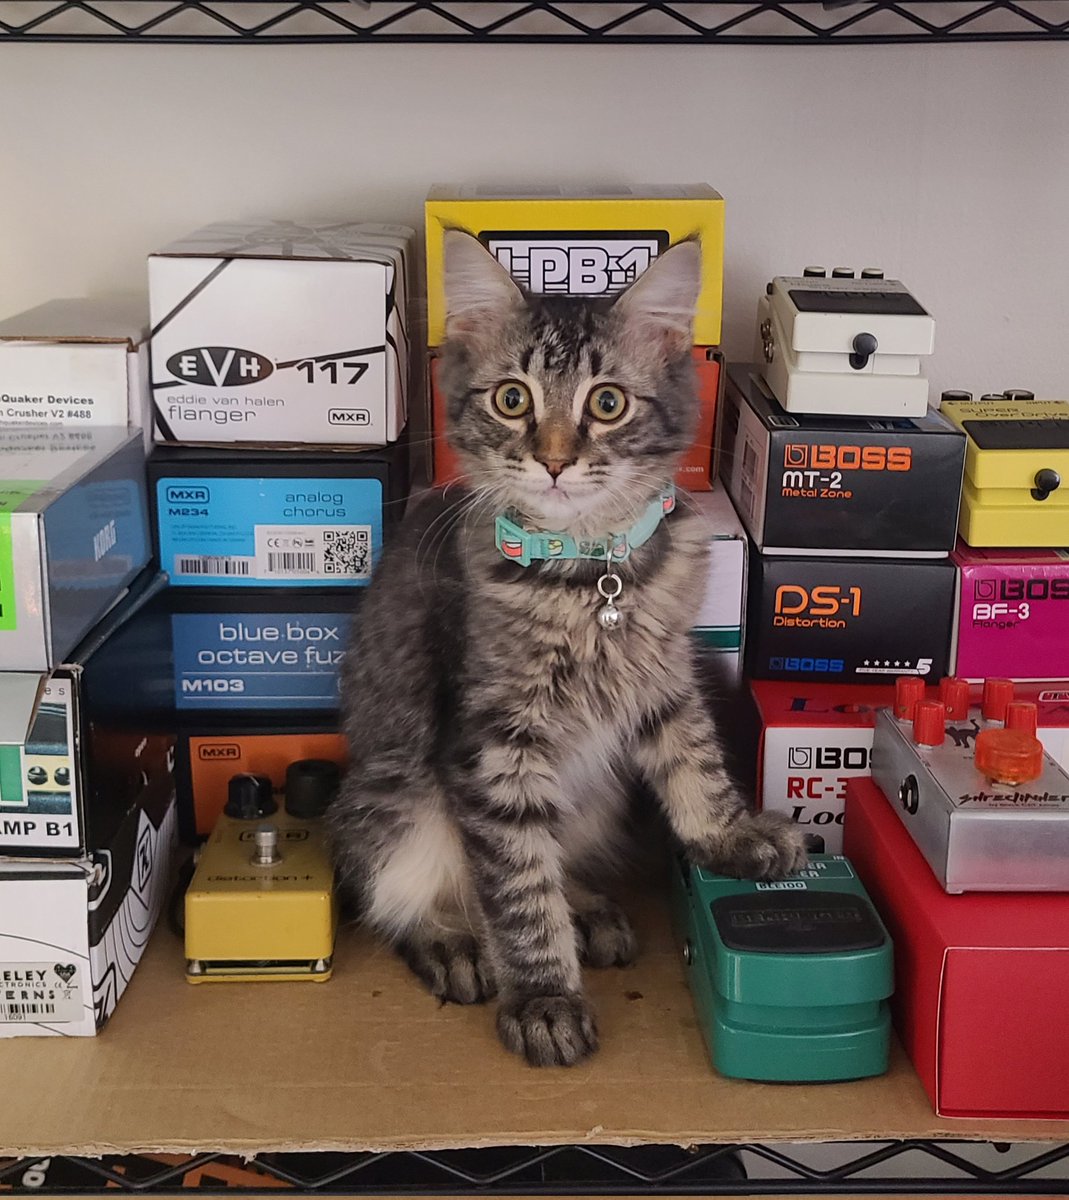 How young is too young to get them started?😂 #guitar #music #cats #catsoftwitter #catsontwitter #CatsLover #mxr #ehx #bosspedals #bosseffects #guitarpedals #behringer @jimdunlopusa @bossinfoglobal @EHX